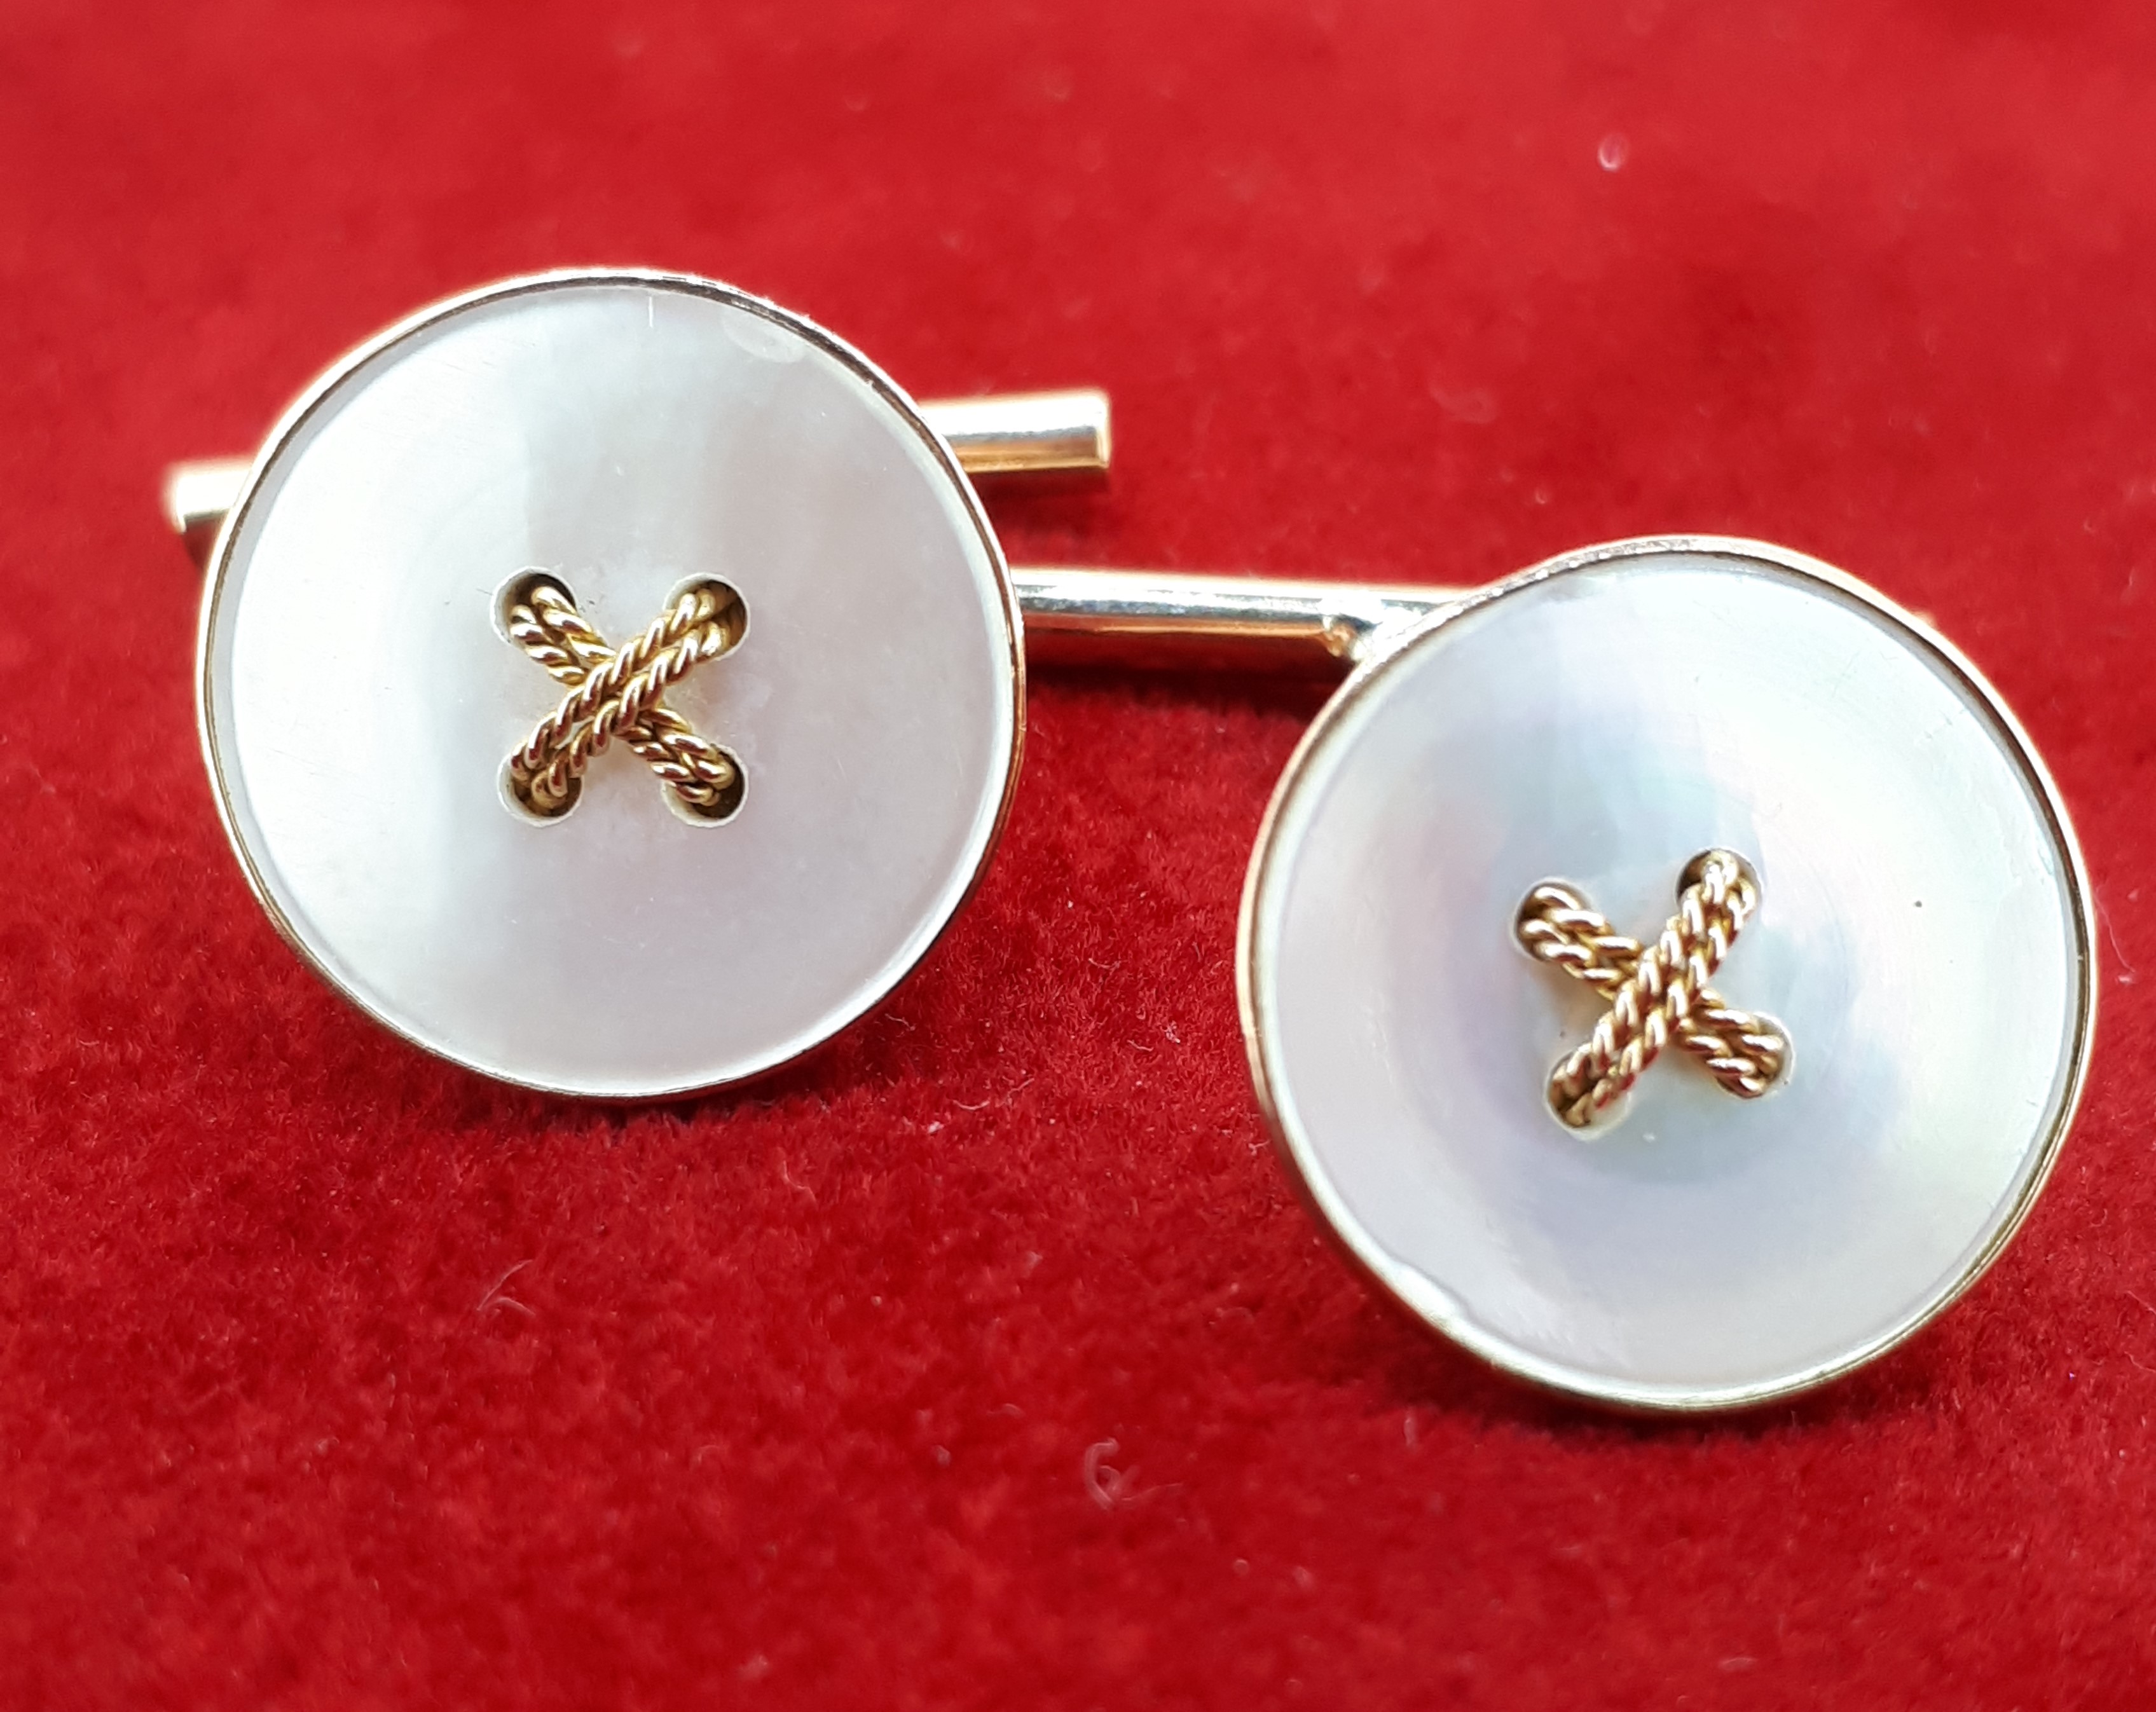 Vintage 9ct (375) Rose Gold Mother of Pearl Button Cufflinks on Chain Fittings - Image 2 of 8